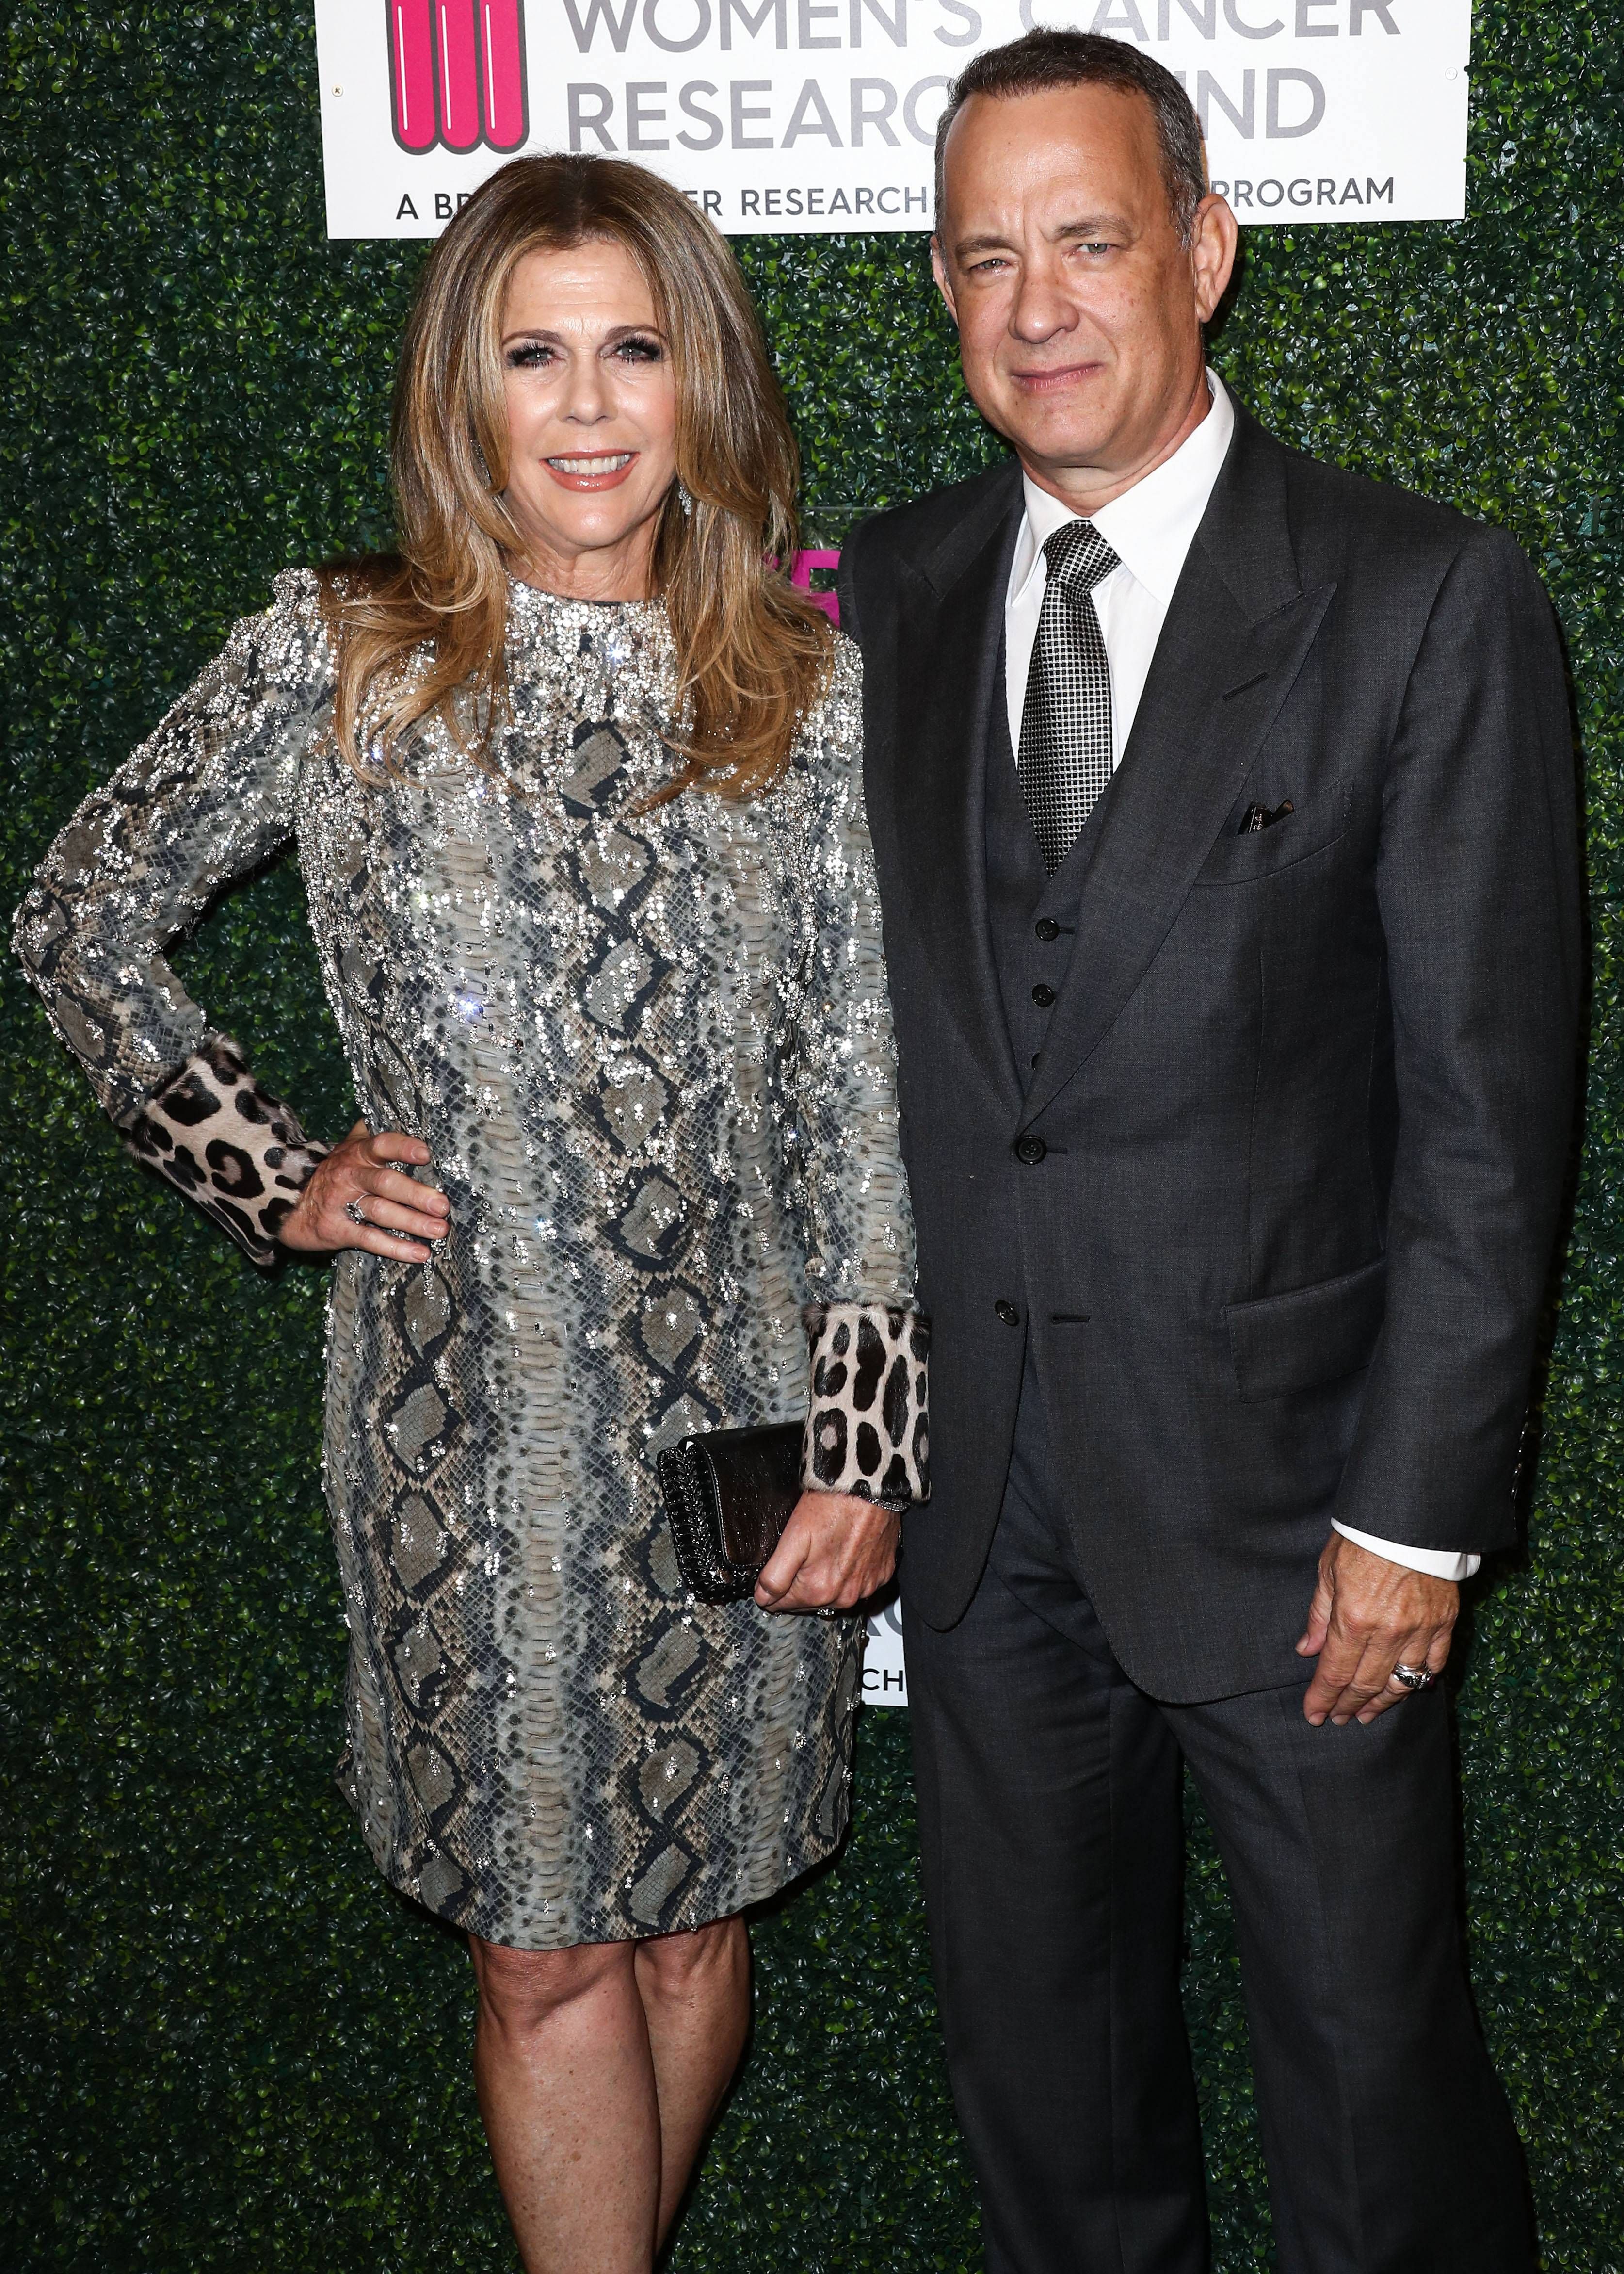 A lovely photo showing Riya Wilson in a snake-print knee-length dress, standing beside Tom Hanks, who has on a well-tailored black suit and pant, with dotted black tie to match.